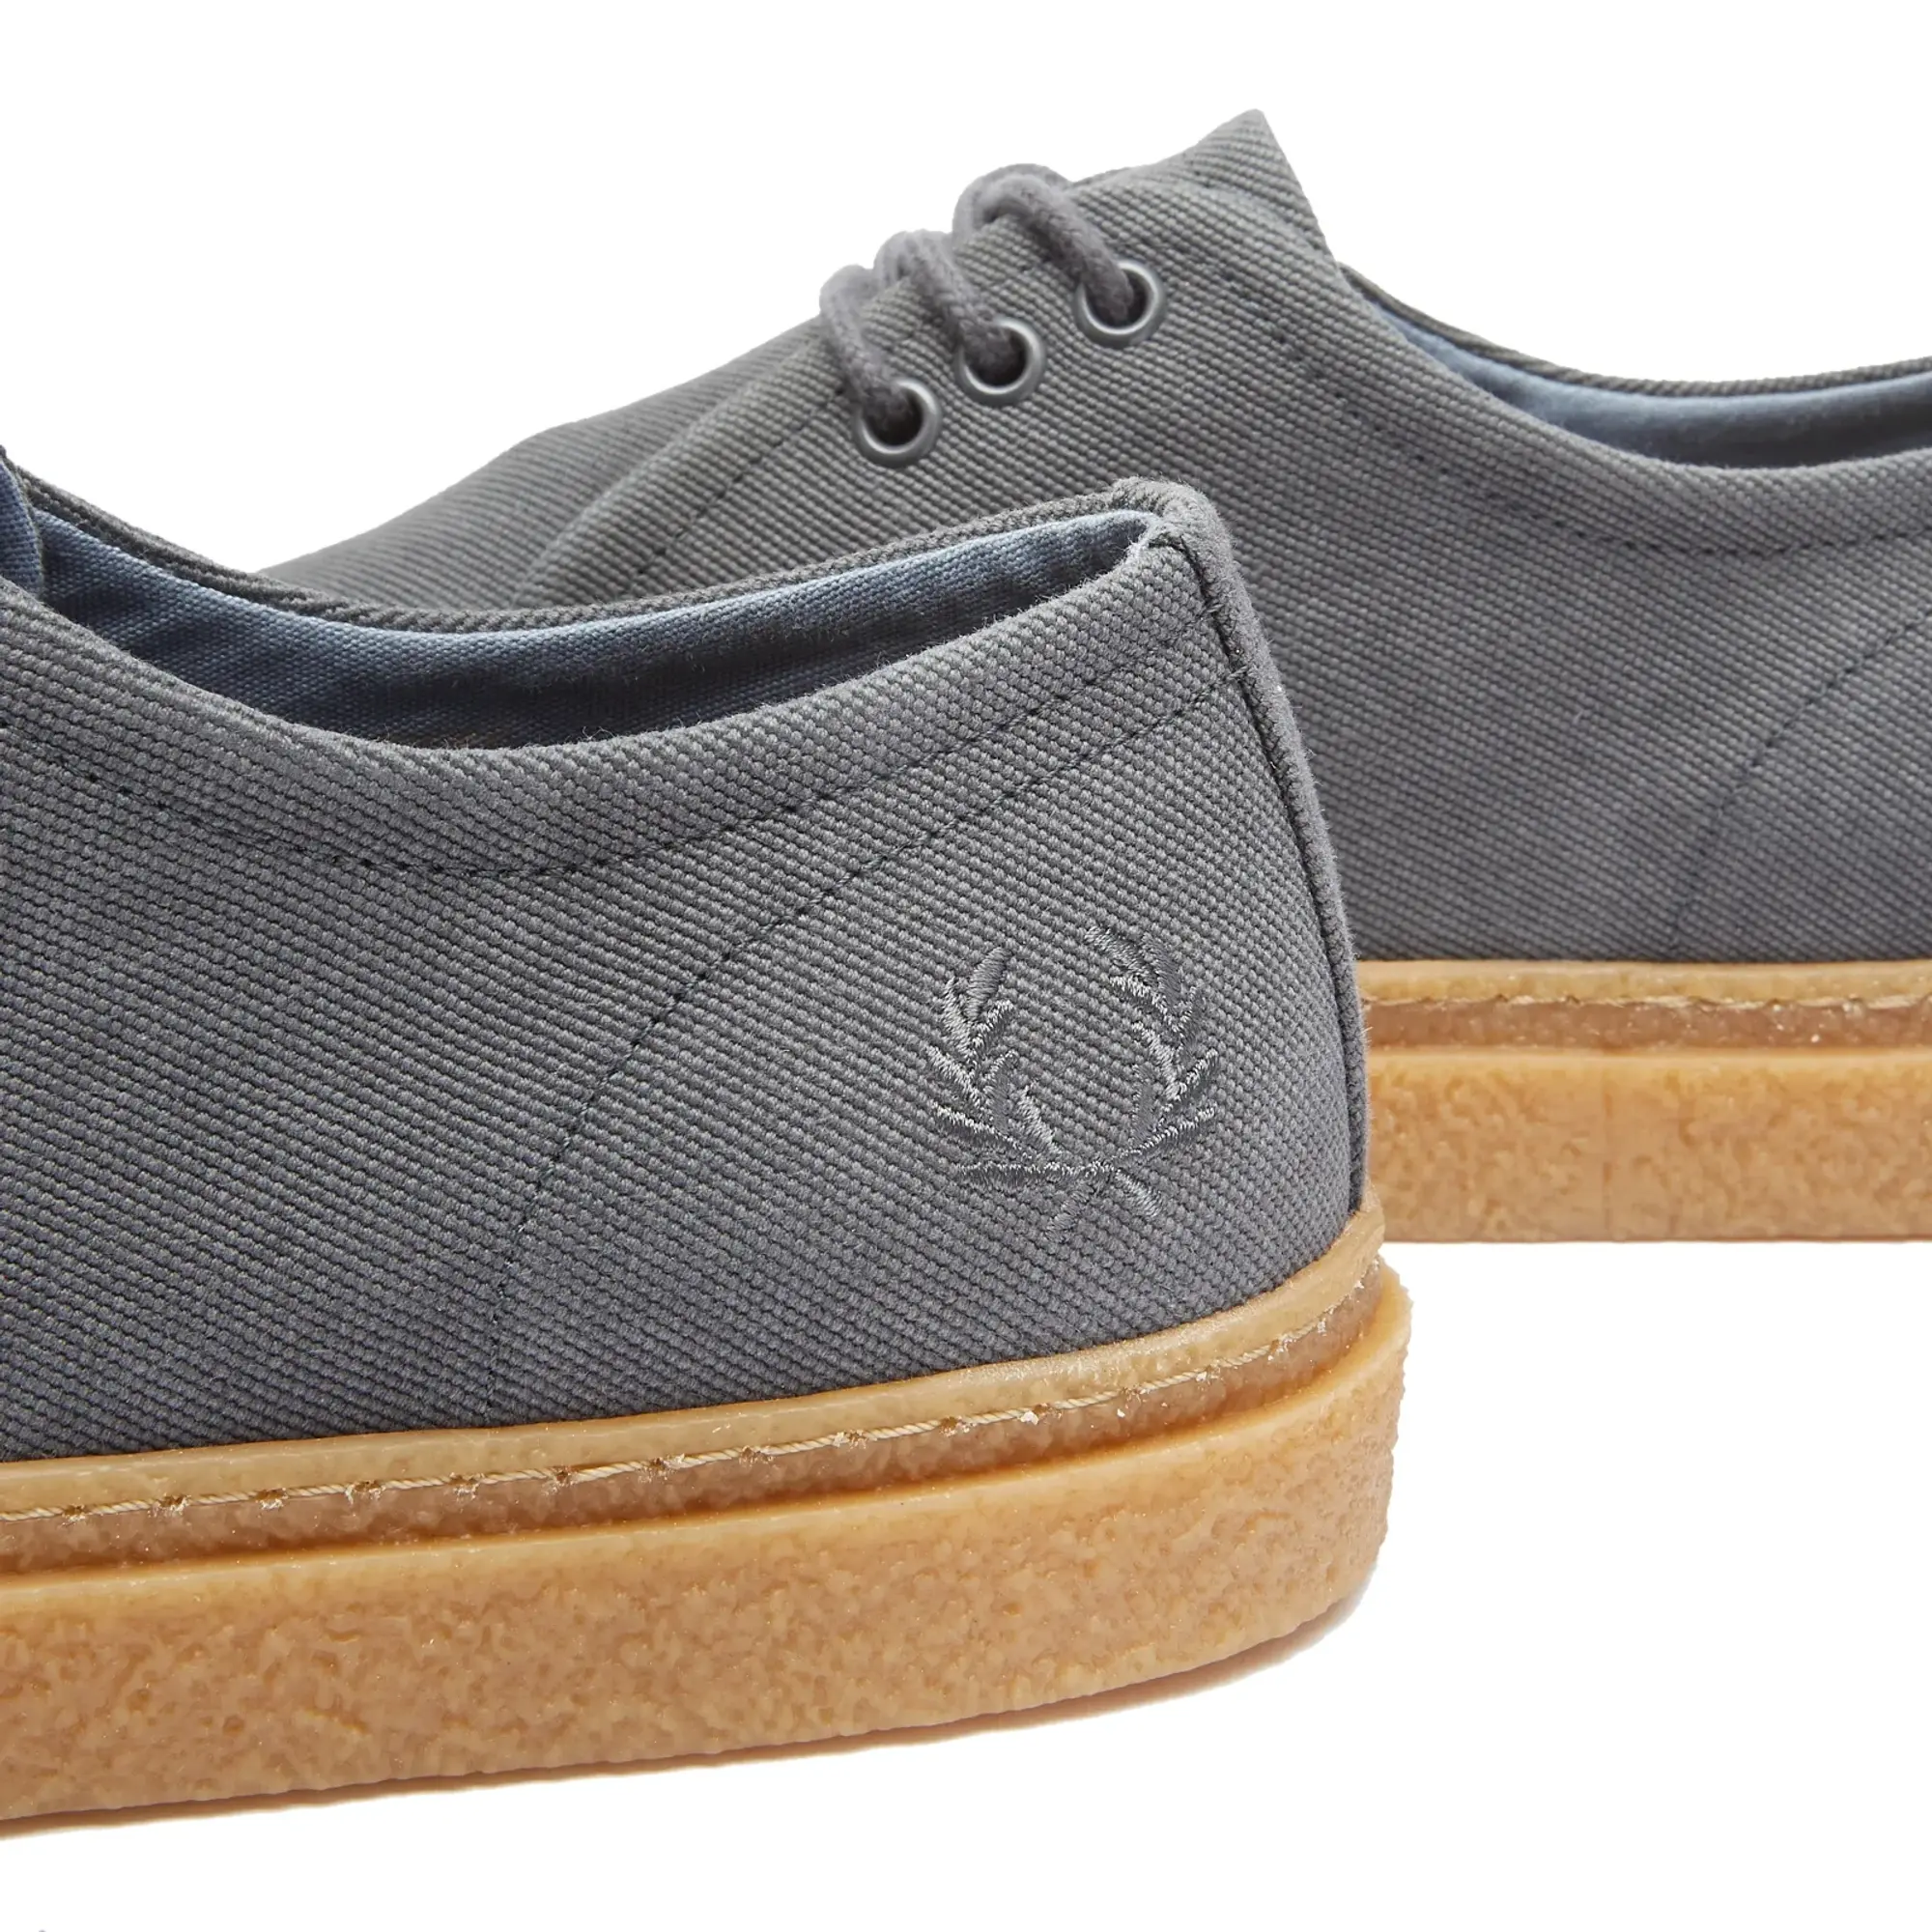 Fred Perry Men's Linden Canvas Shoe Charcoal